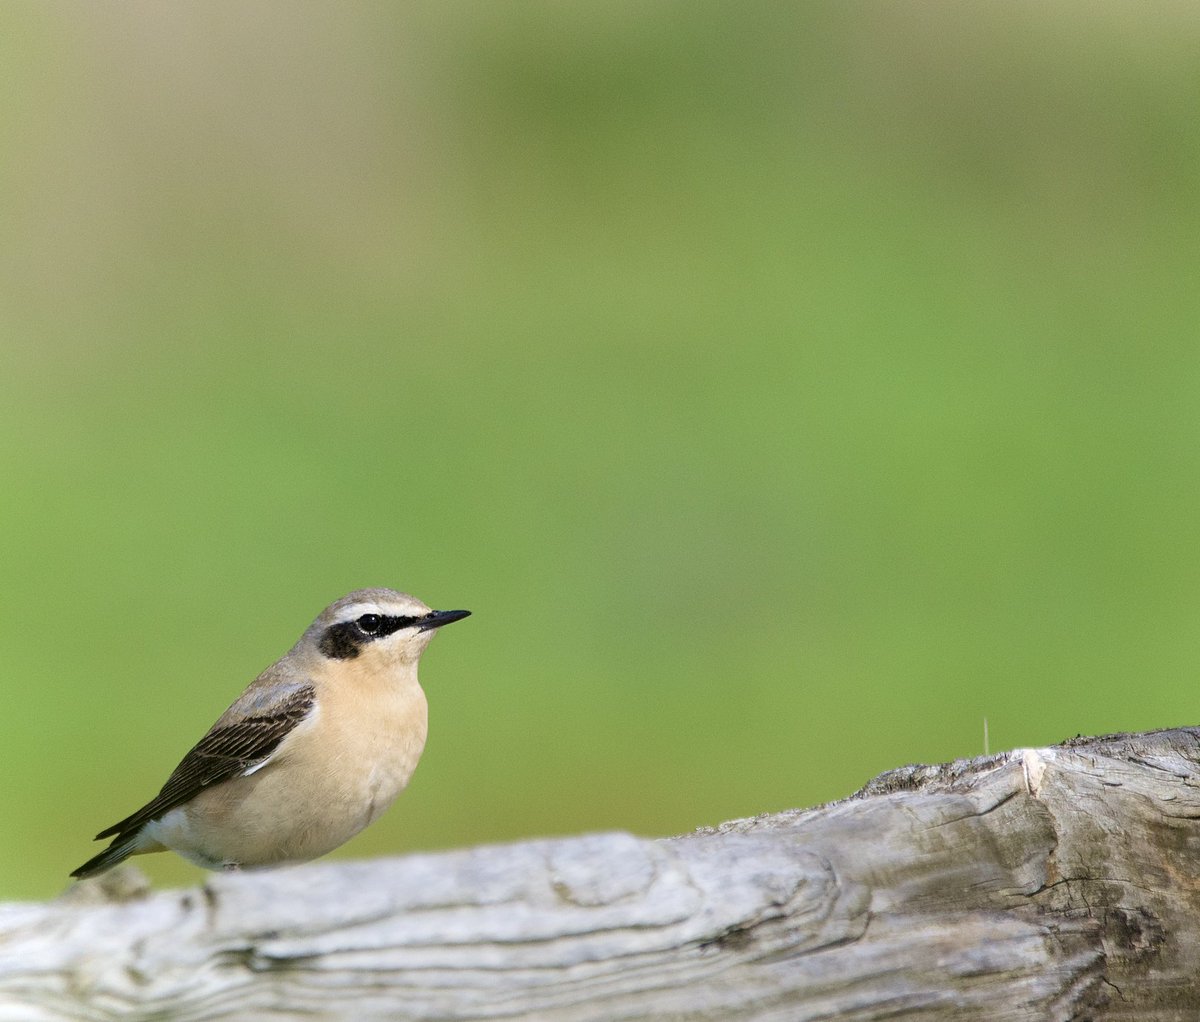 On a balmy spring day at @RSPBRainham, Wood Warbler - the first for the site (and my first for London) - Sedge, Reed, Garden and Cetti’s Warblers, Chiffchaff, Blackcap and both Whitethroats were all on song. But for me the star of the show was this confiding Wheatear by the river